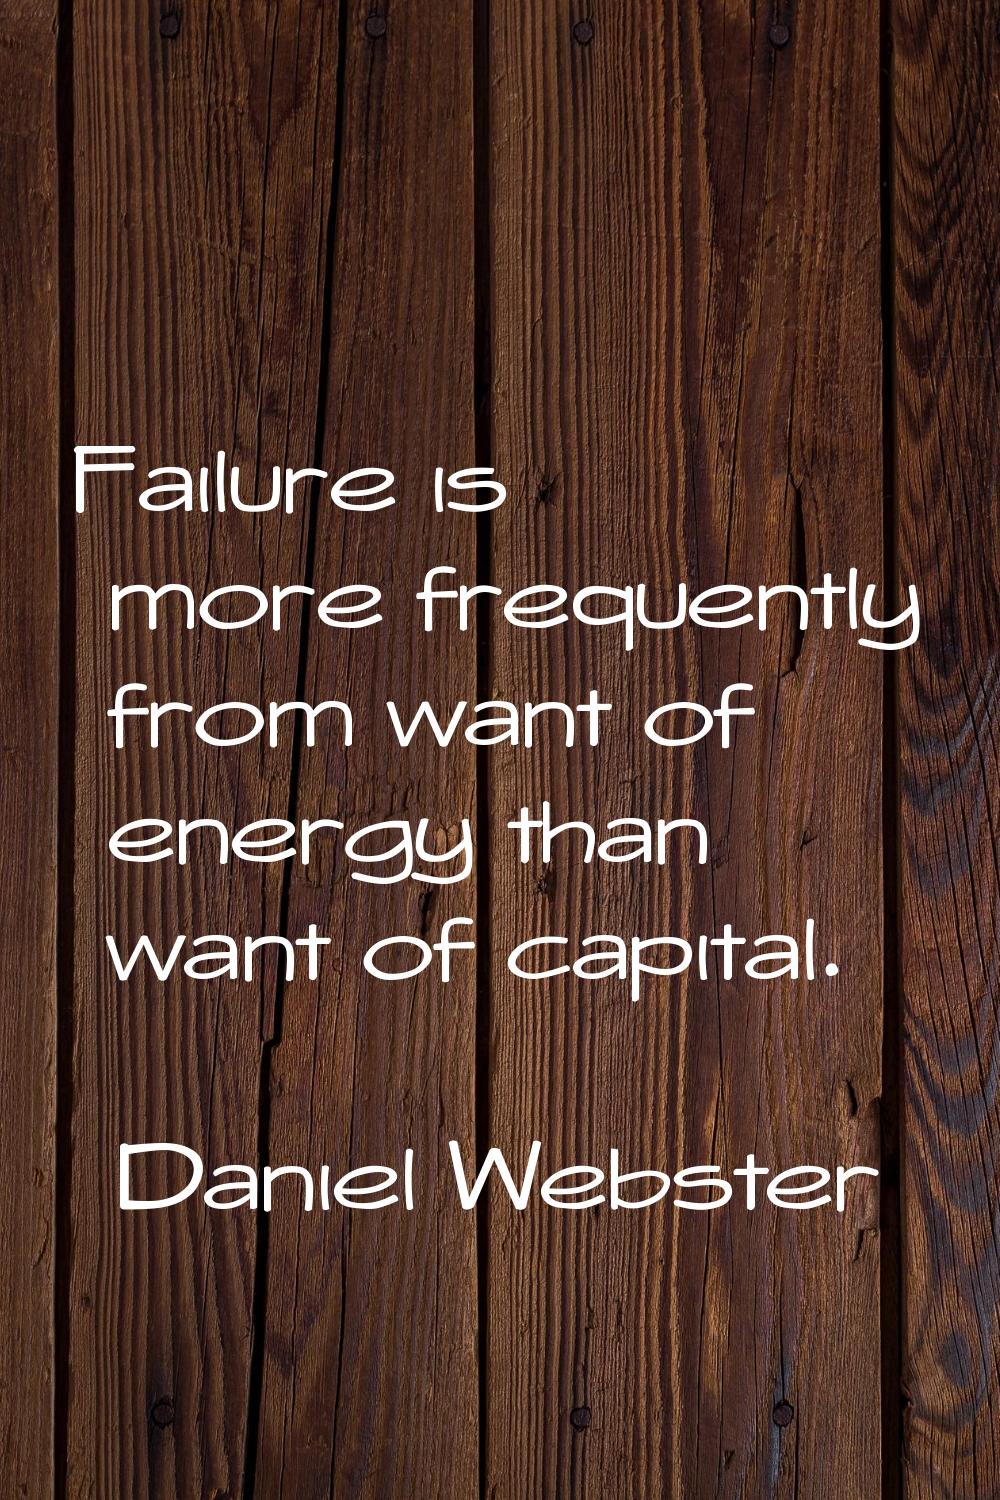 Failure is more frequently from want of energy than want of capital.